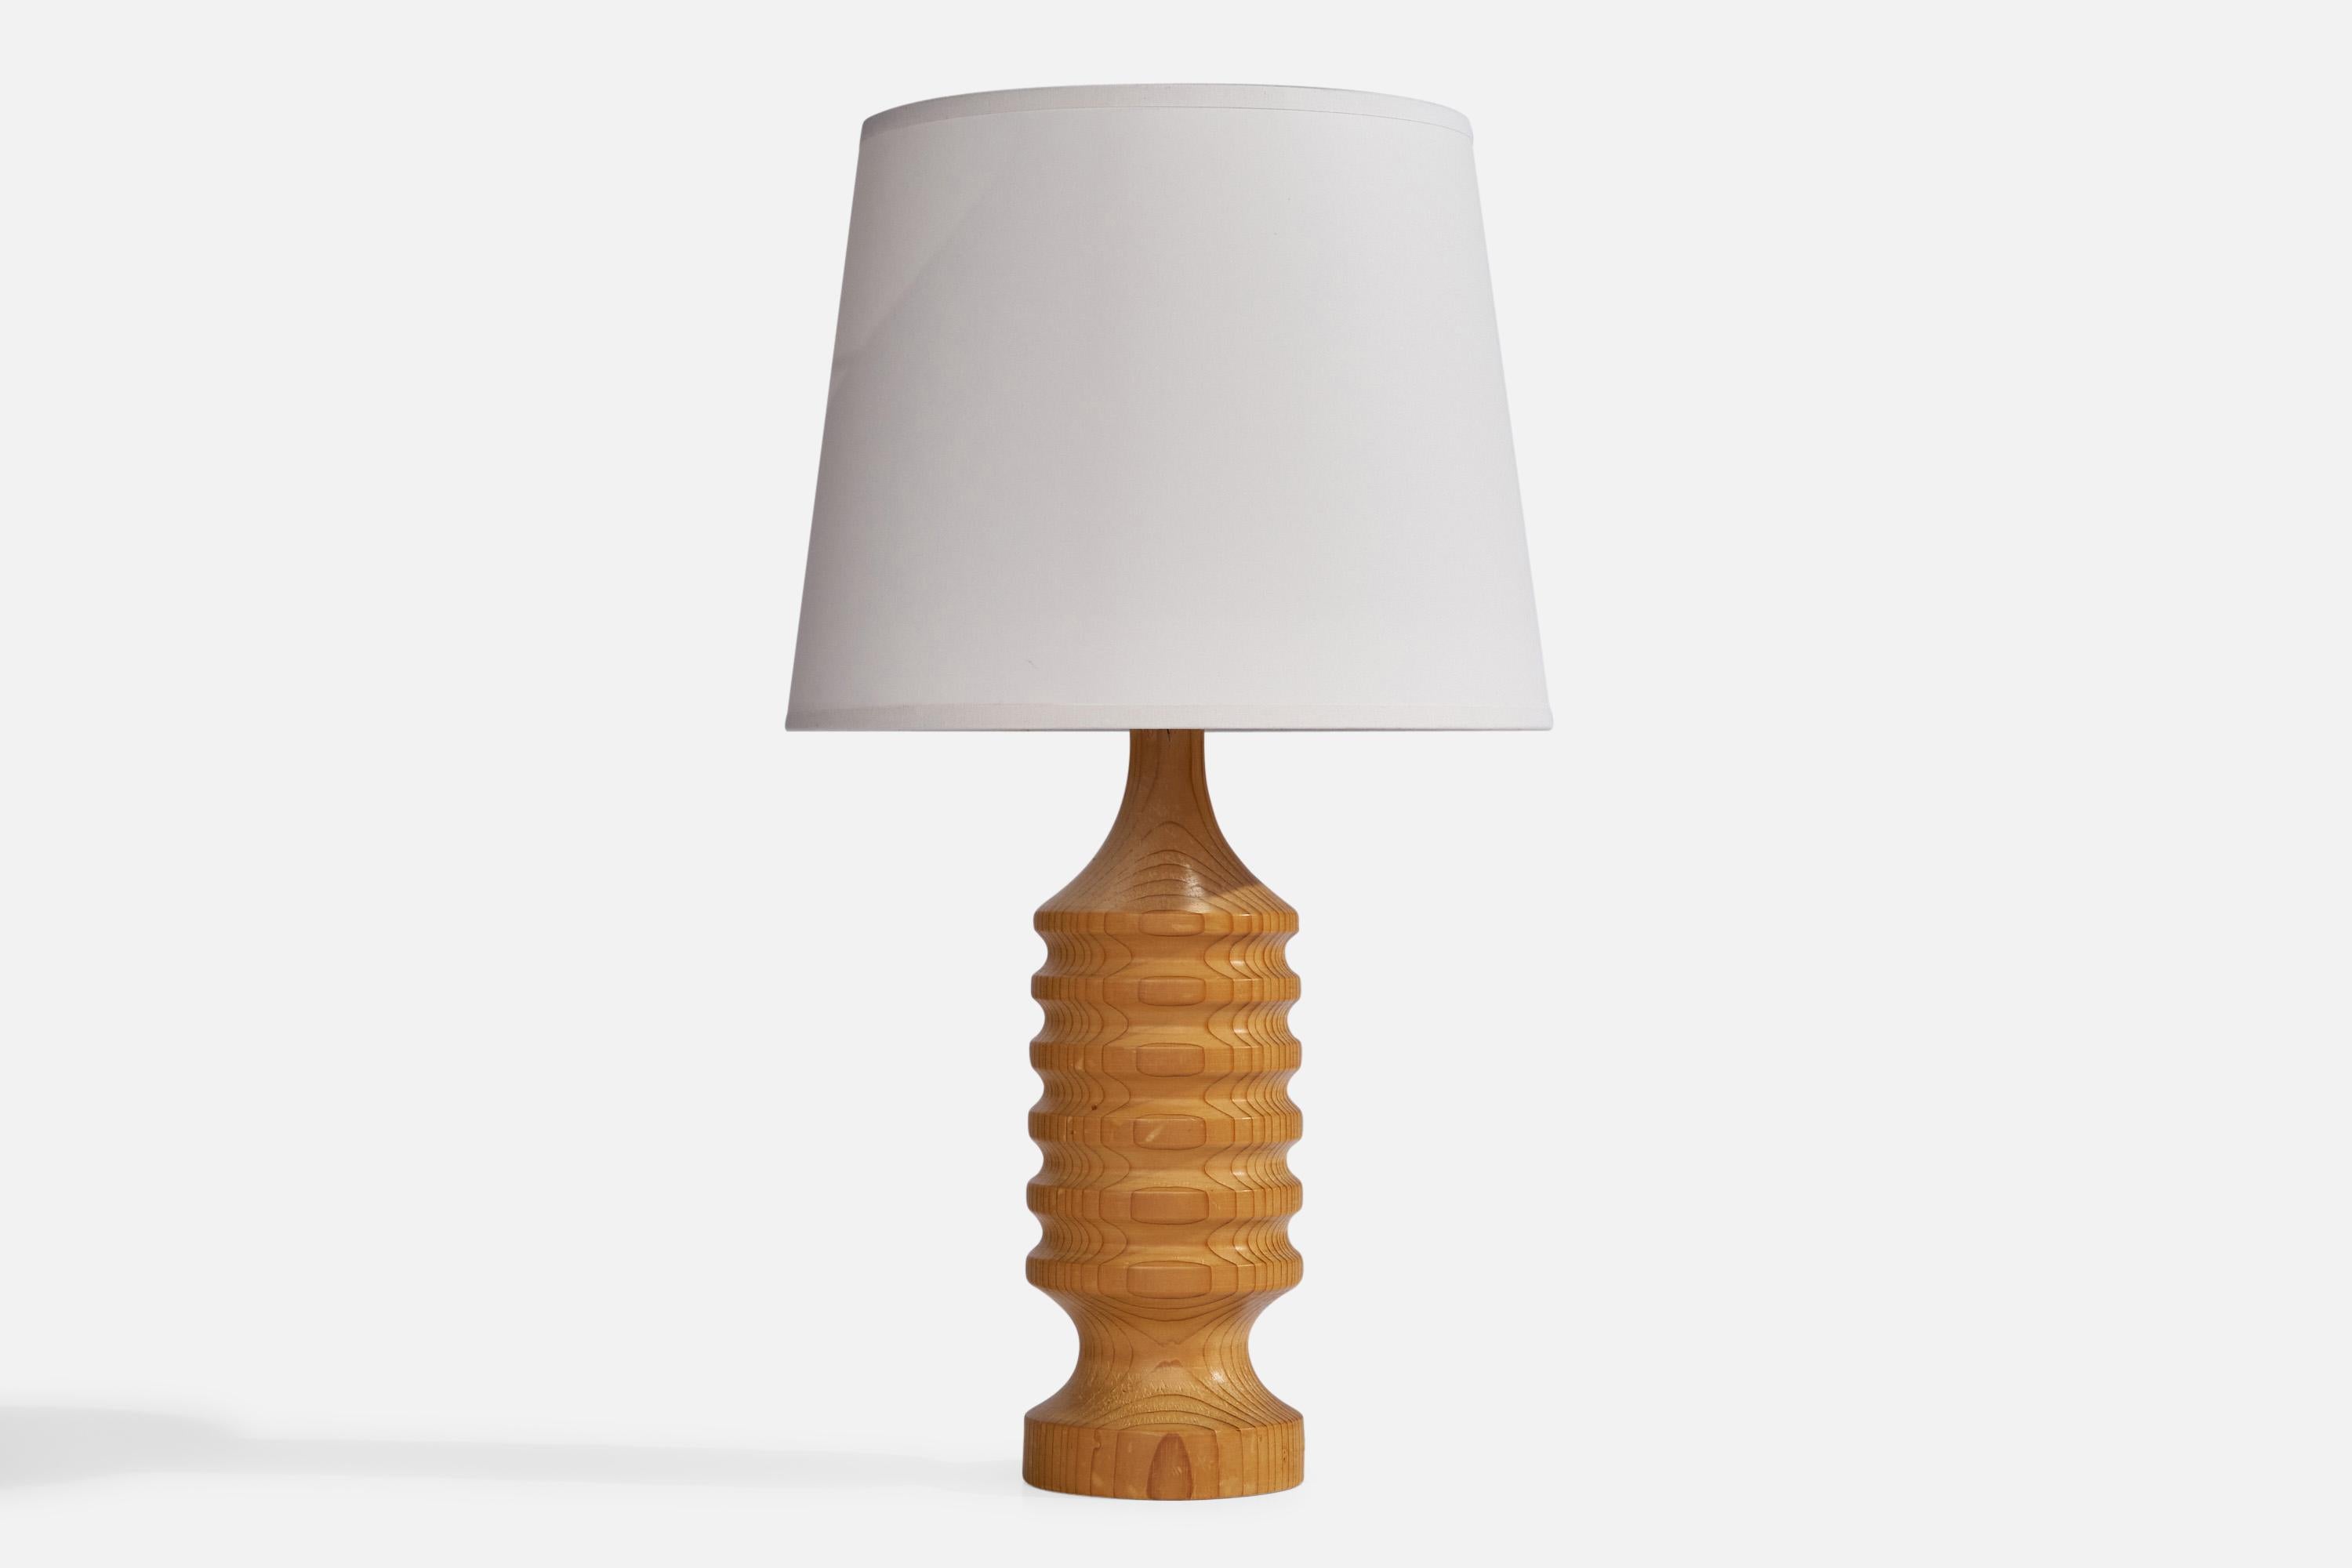 A pine table lamp designed and produced in Sweden, 1970s.

Dimensions of Lamp (inches): 12” H x 3.75” Diameter
Dimensions of Shade (inches): 8” Top Diameter x 10” Bottom Diameter x 8” H
Dimensions of Lamp with Shade (inches): 17.75” H x 10”